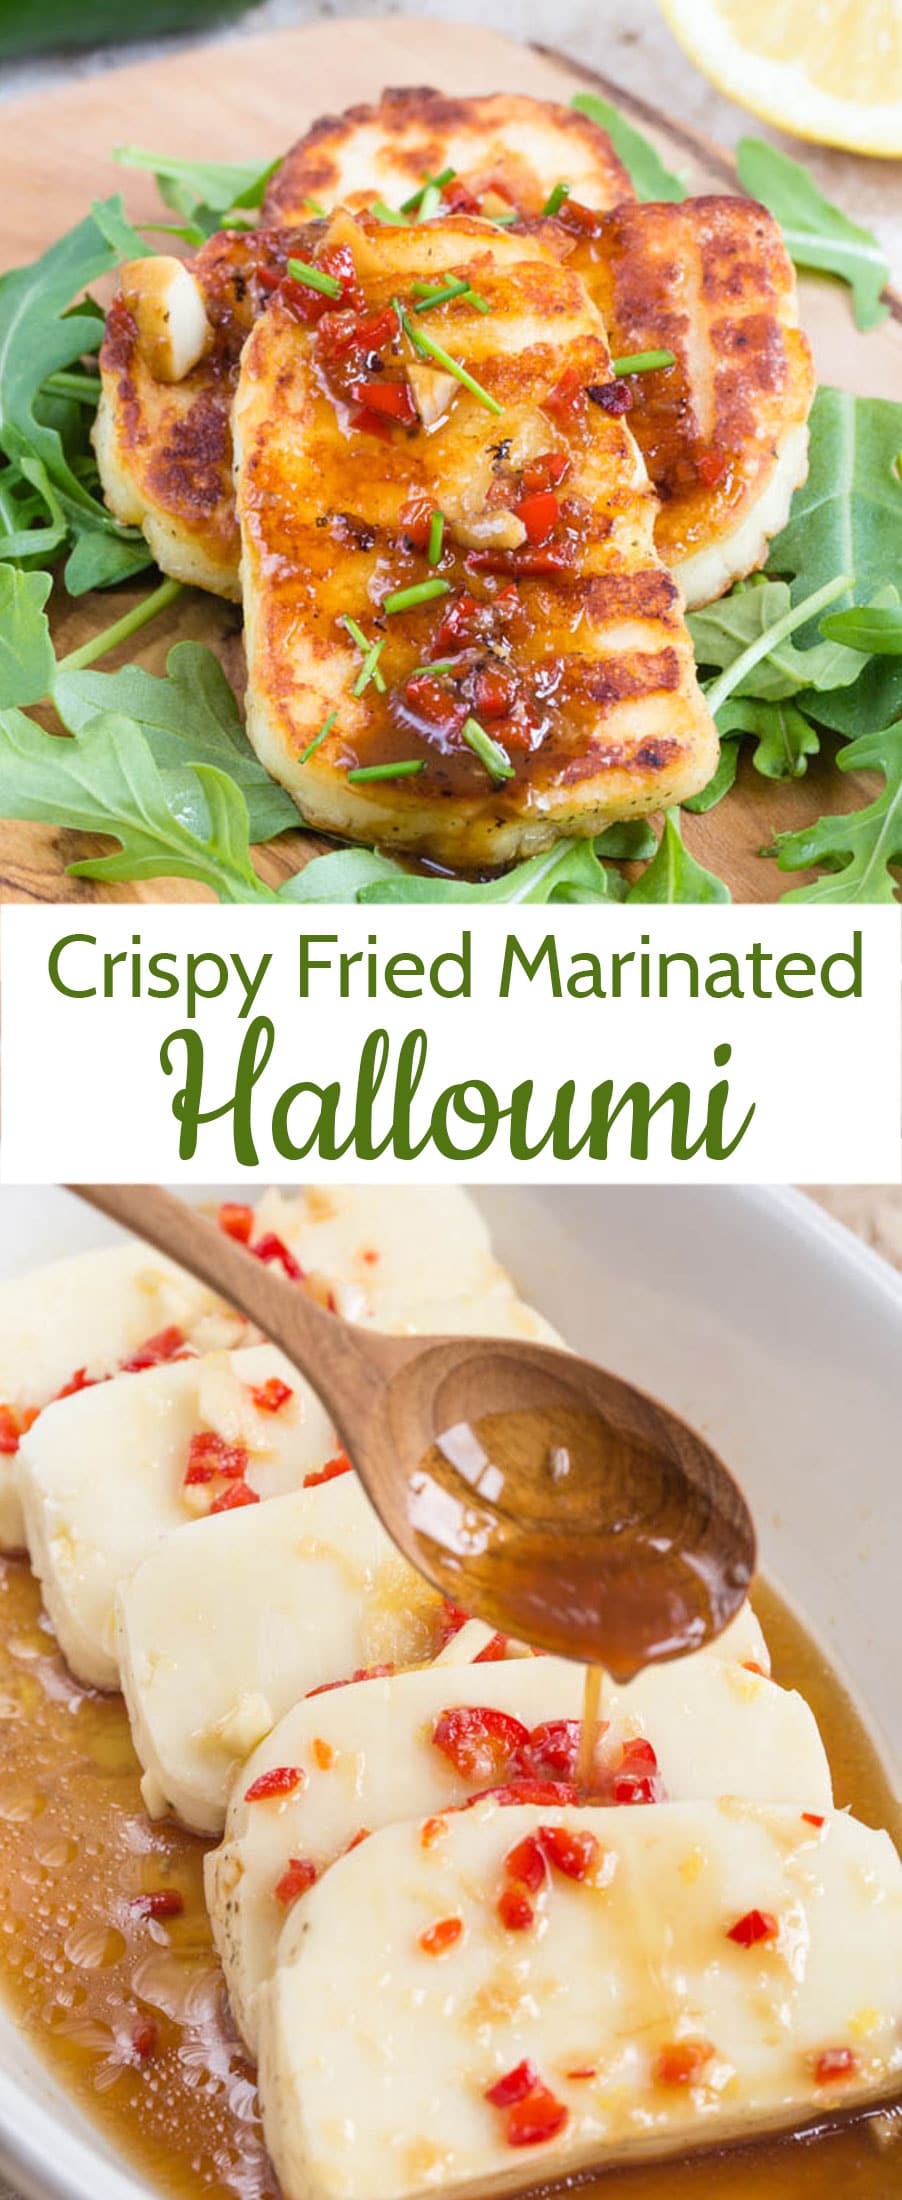 Versatile halloumi cheese works so well with spices: add interest with chili, lime and garlic